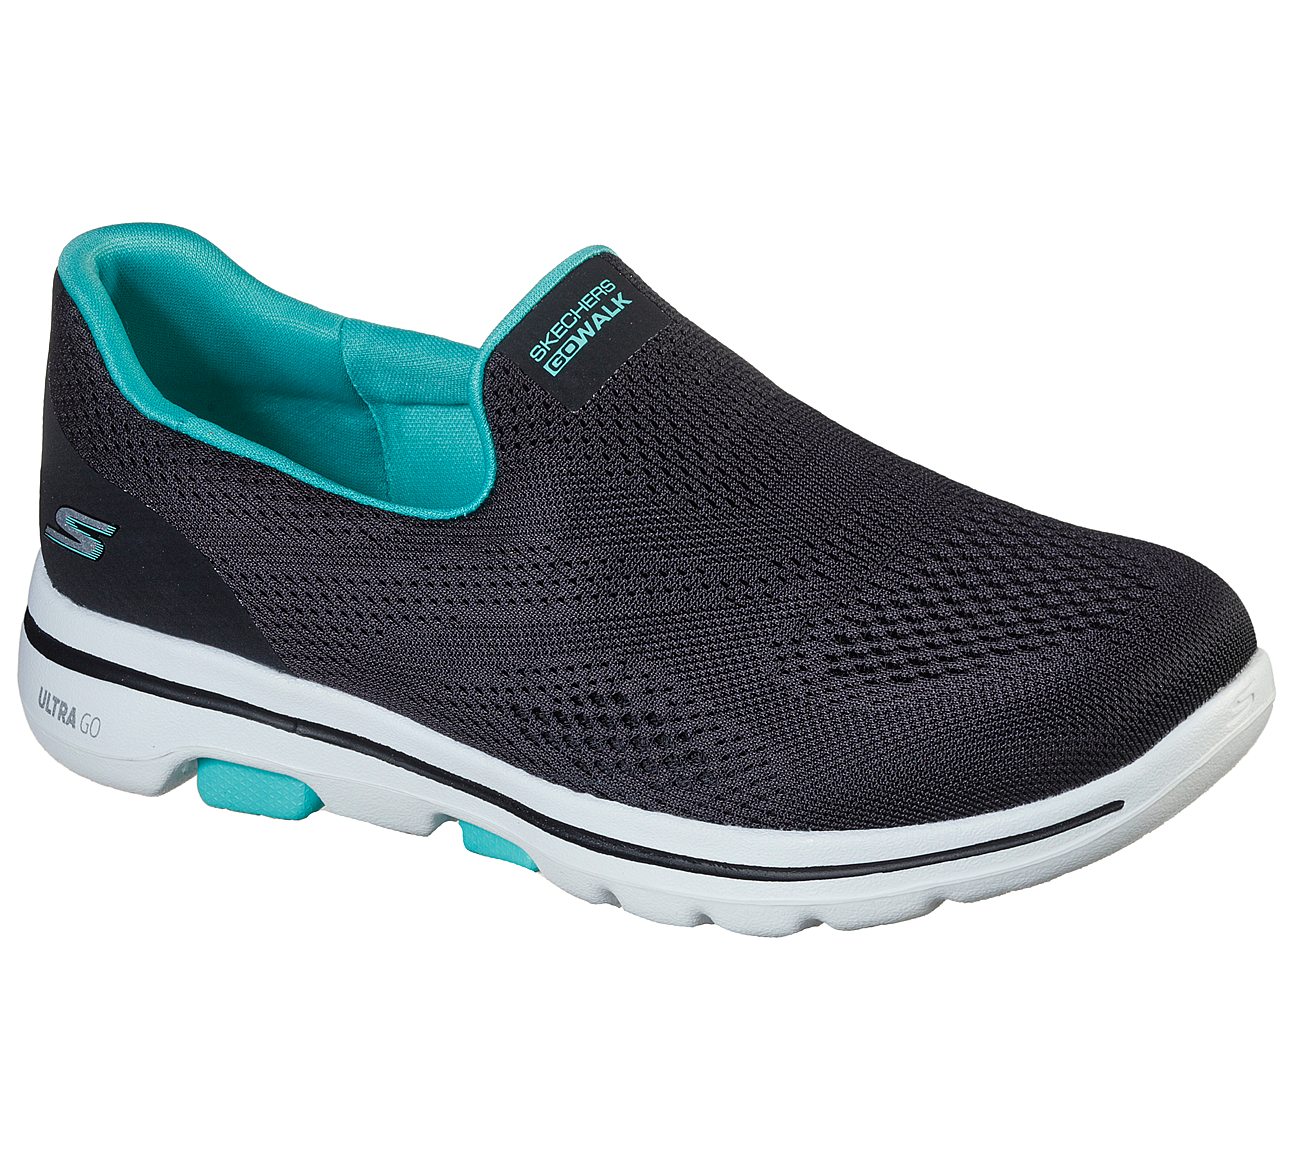 GO WALK 5, BLACK/TURQUOISE Footwear Right View